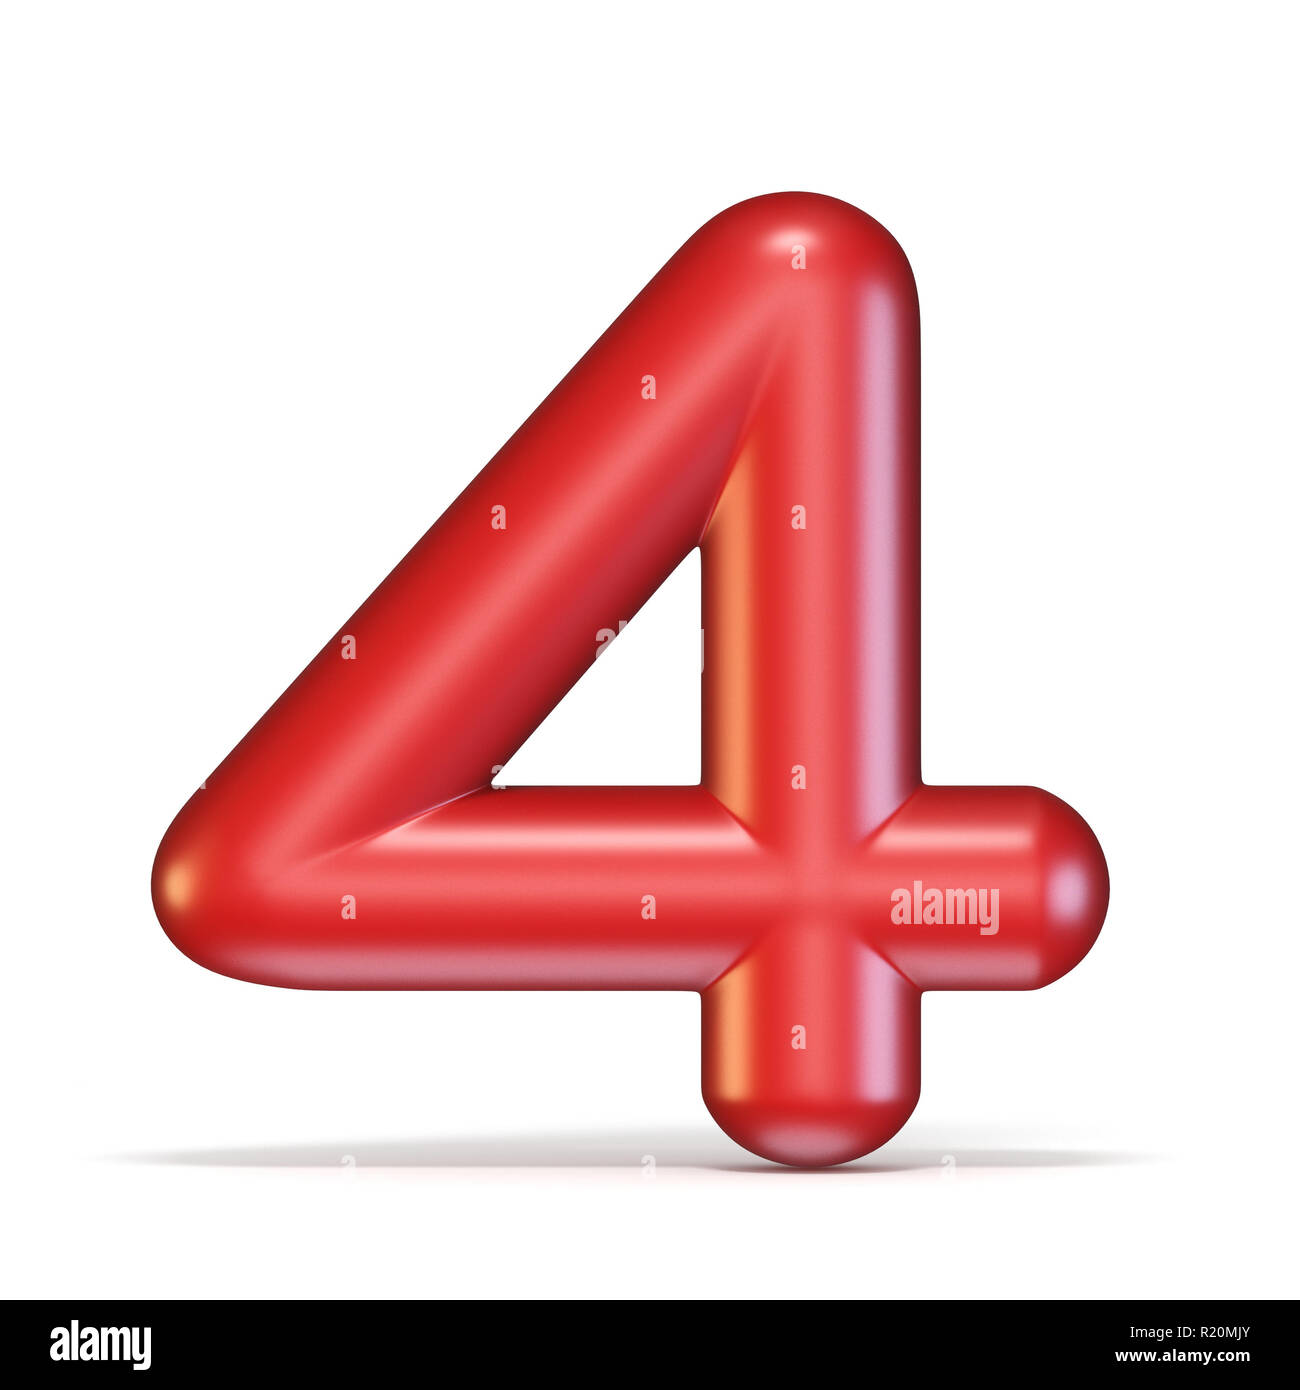 Red glossy font Number 4 FOUR 3D rendering illustration isolated on white background Stock Photo